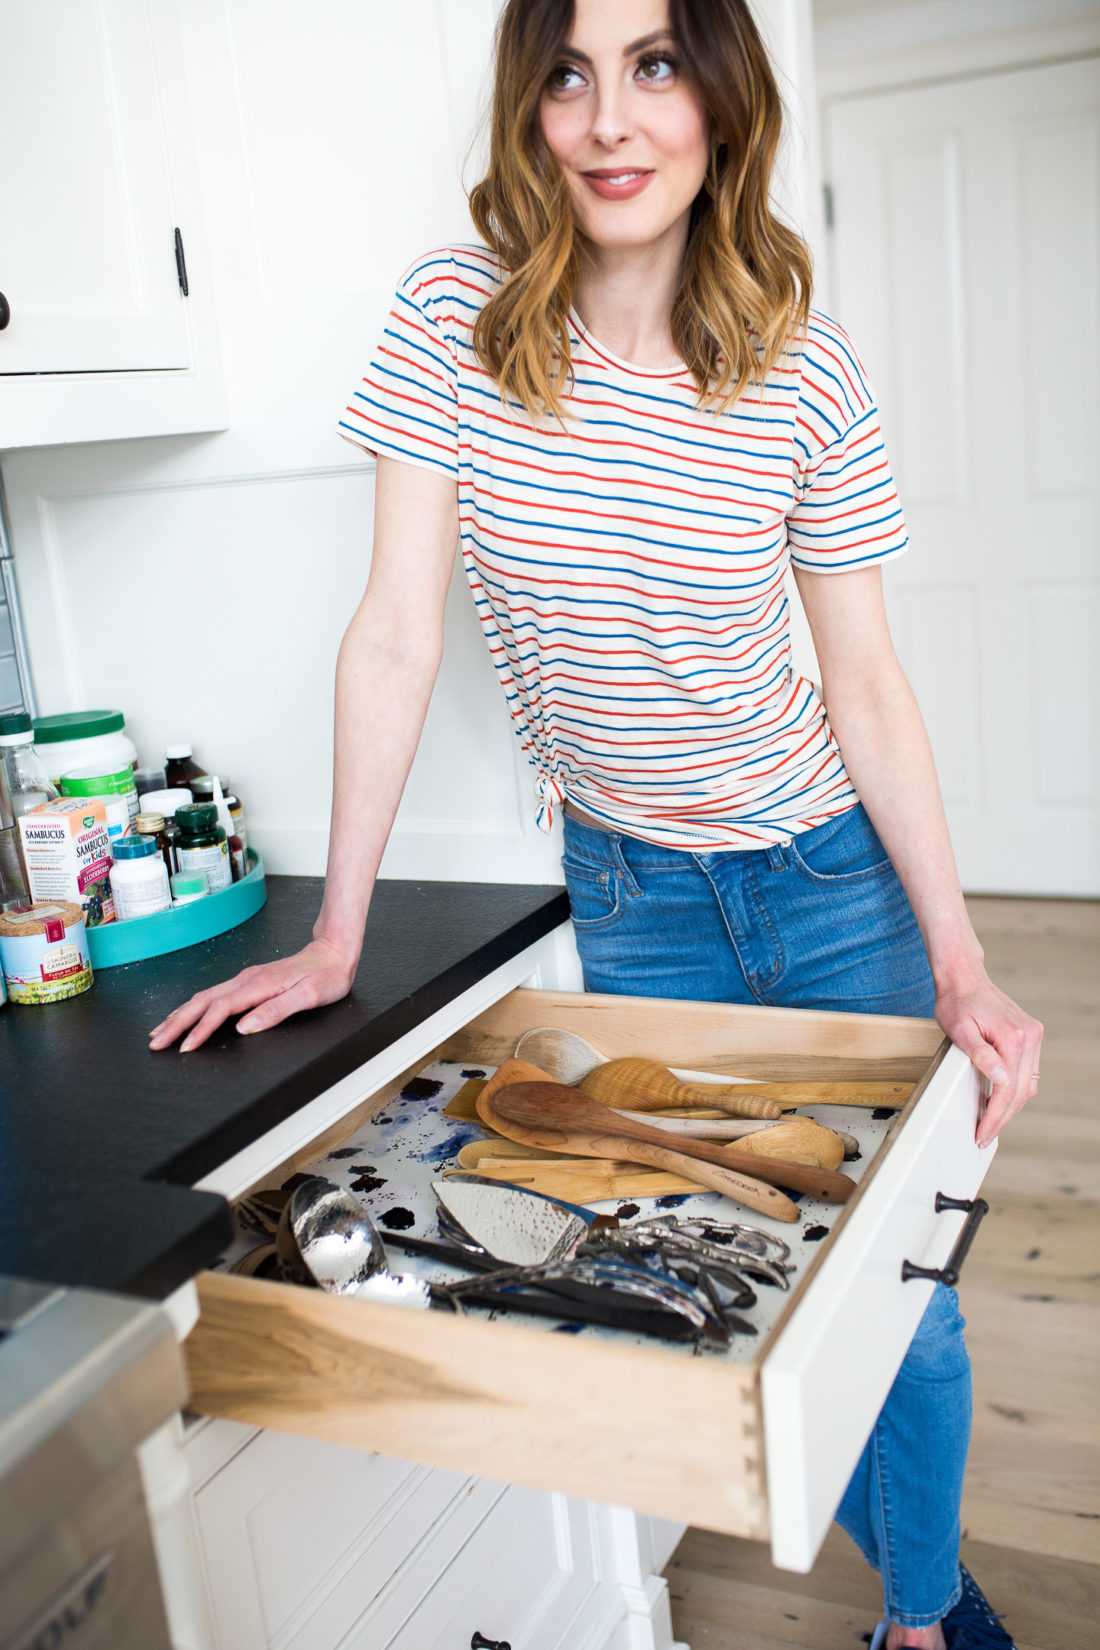 Eva Amurri Martino gives her serving drawer a bit of life with leftover wallpaper